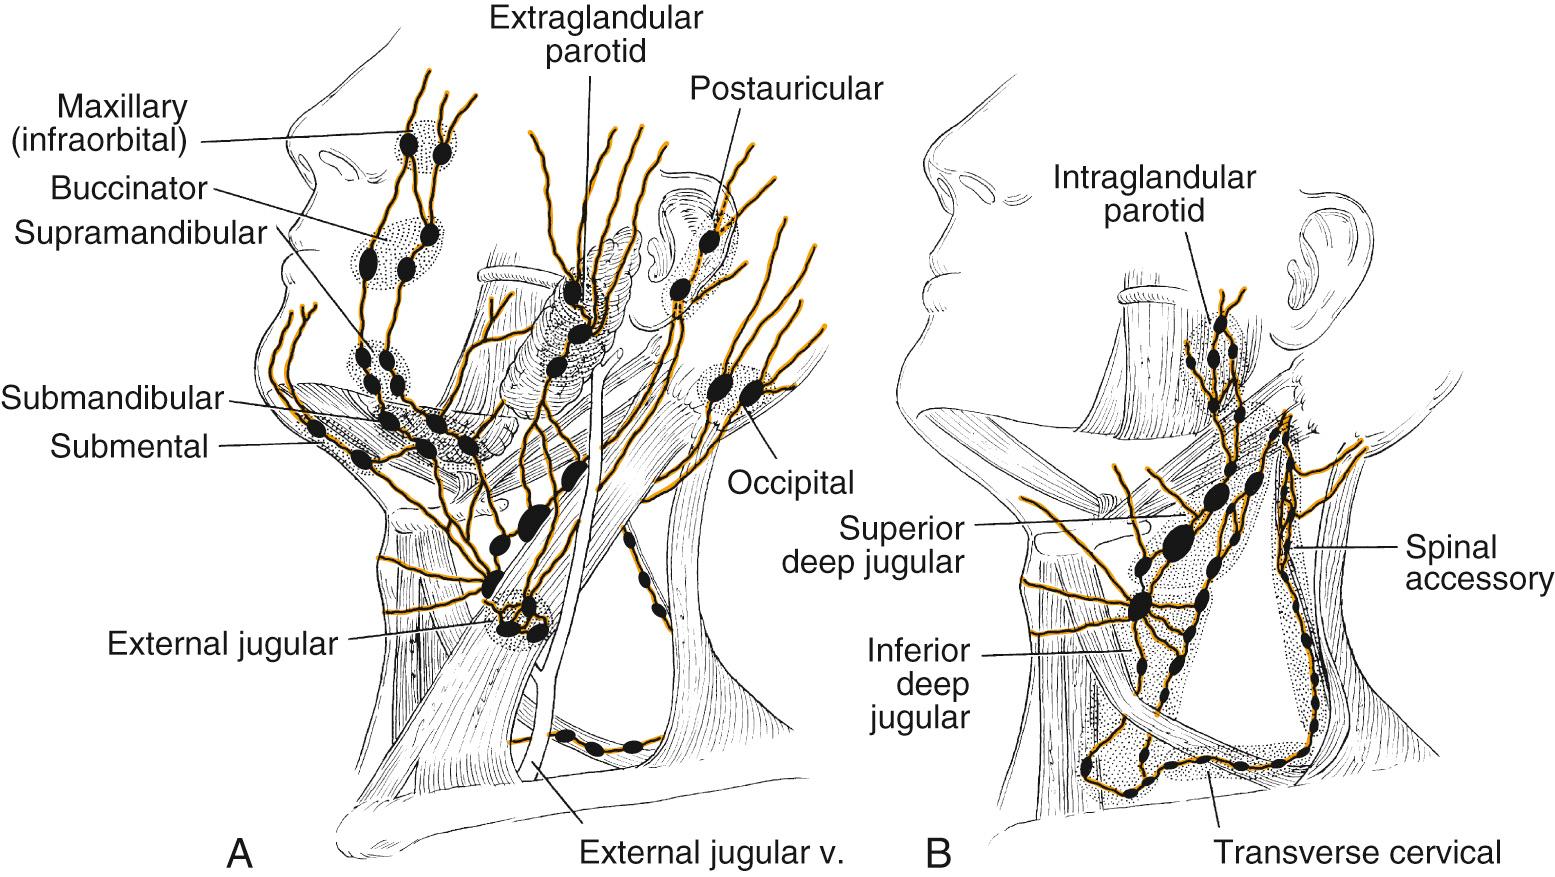 Fig. 96.4, Lymph node chains of the neck that may be involved with cervical metastatic spread from oropharyngeal tumors. (A) Superficial cervical and facial nodes. (B) Deep cervical and intraparotid lymph nodes.